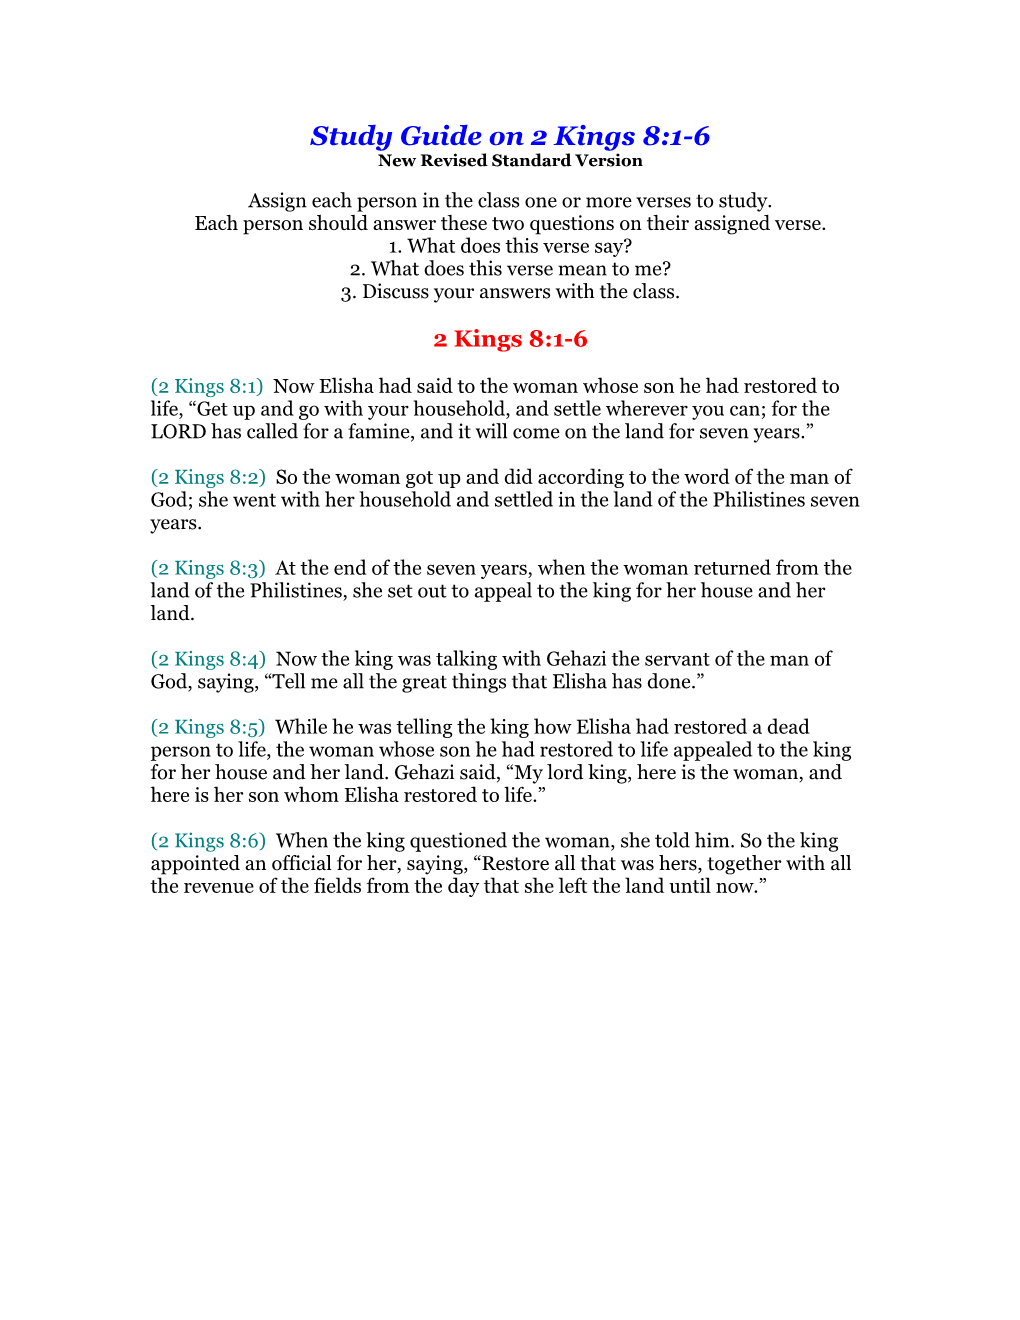 Study Guide on 2 Kings 8:1-6 New Revised Standard Version